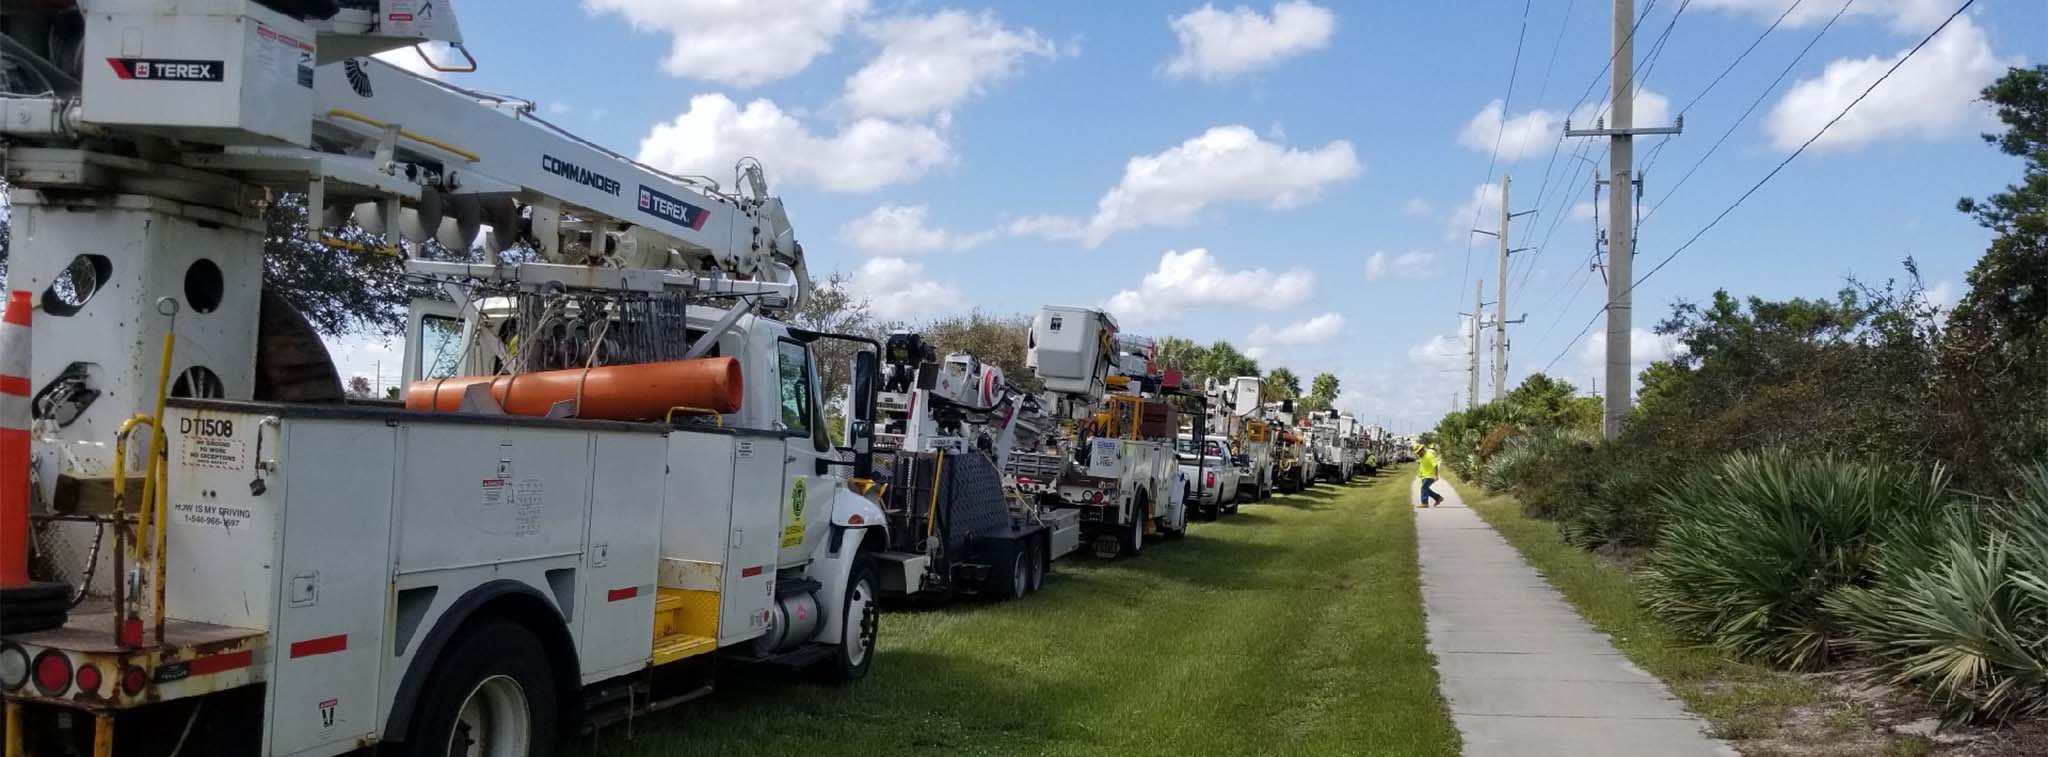 A line of New River bucket trucks waiting to restore power after a Hurricane in Florida.